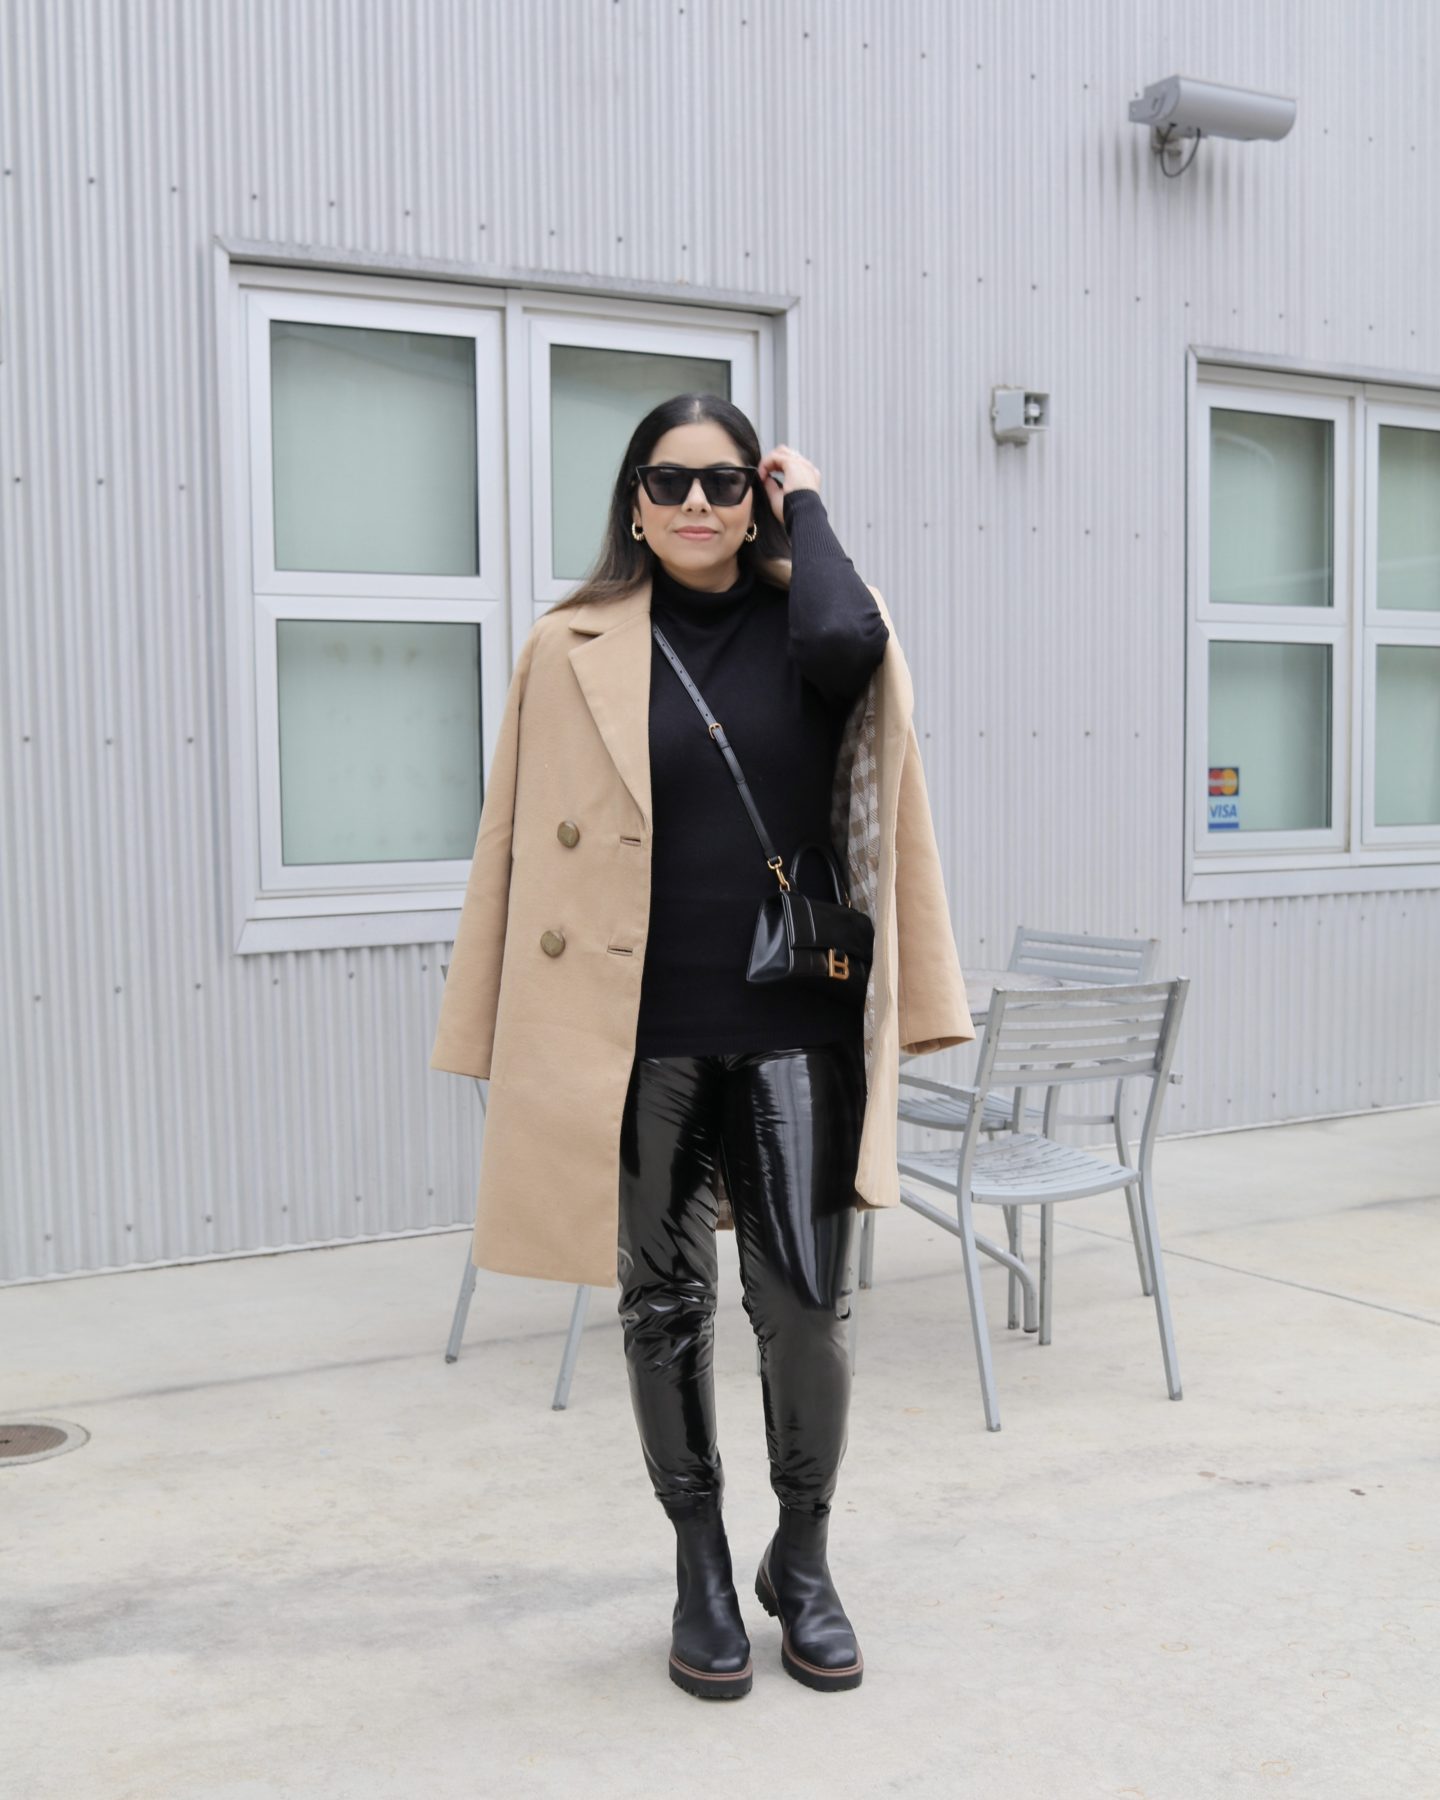 How to style patent leather leggings - Lil bits of Chic